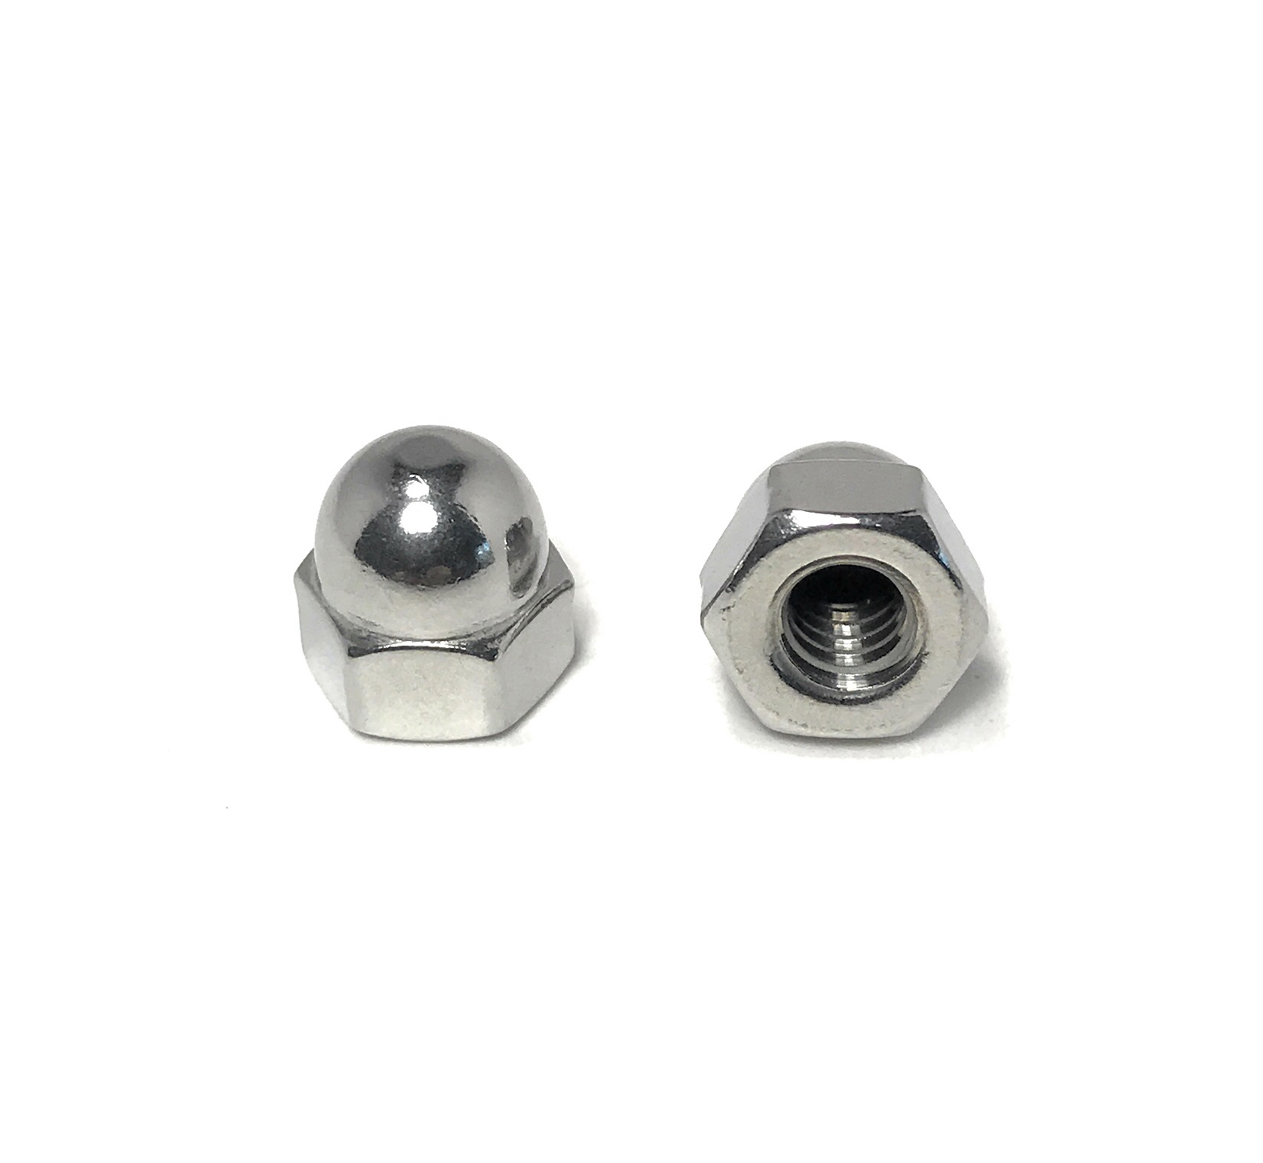 5/16-24 Acorn Cap Nuts Stainless Steel 18-8 Standard Height Quantity 10 